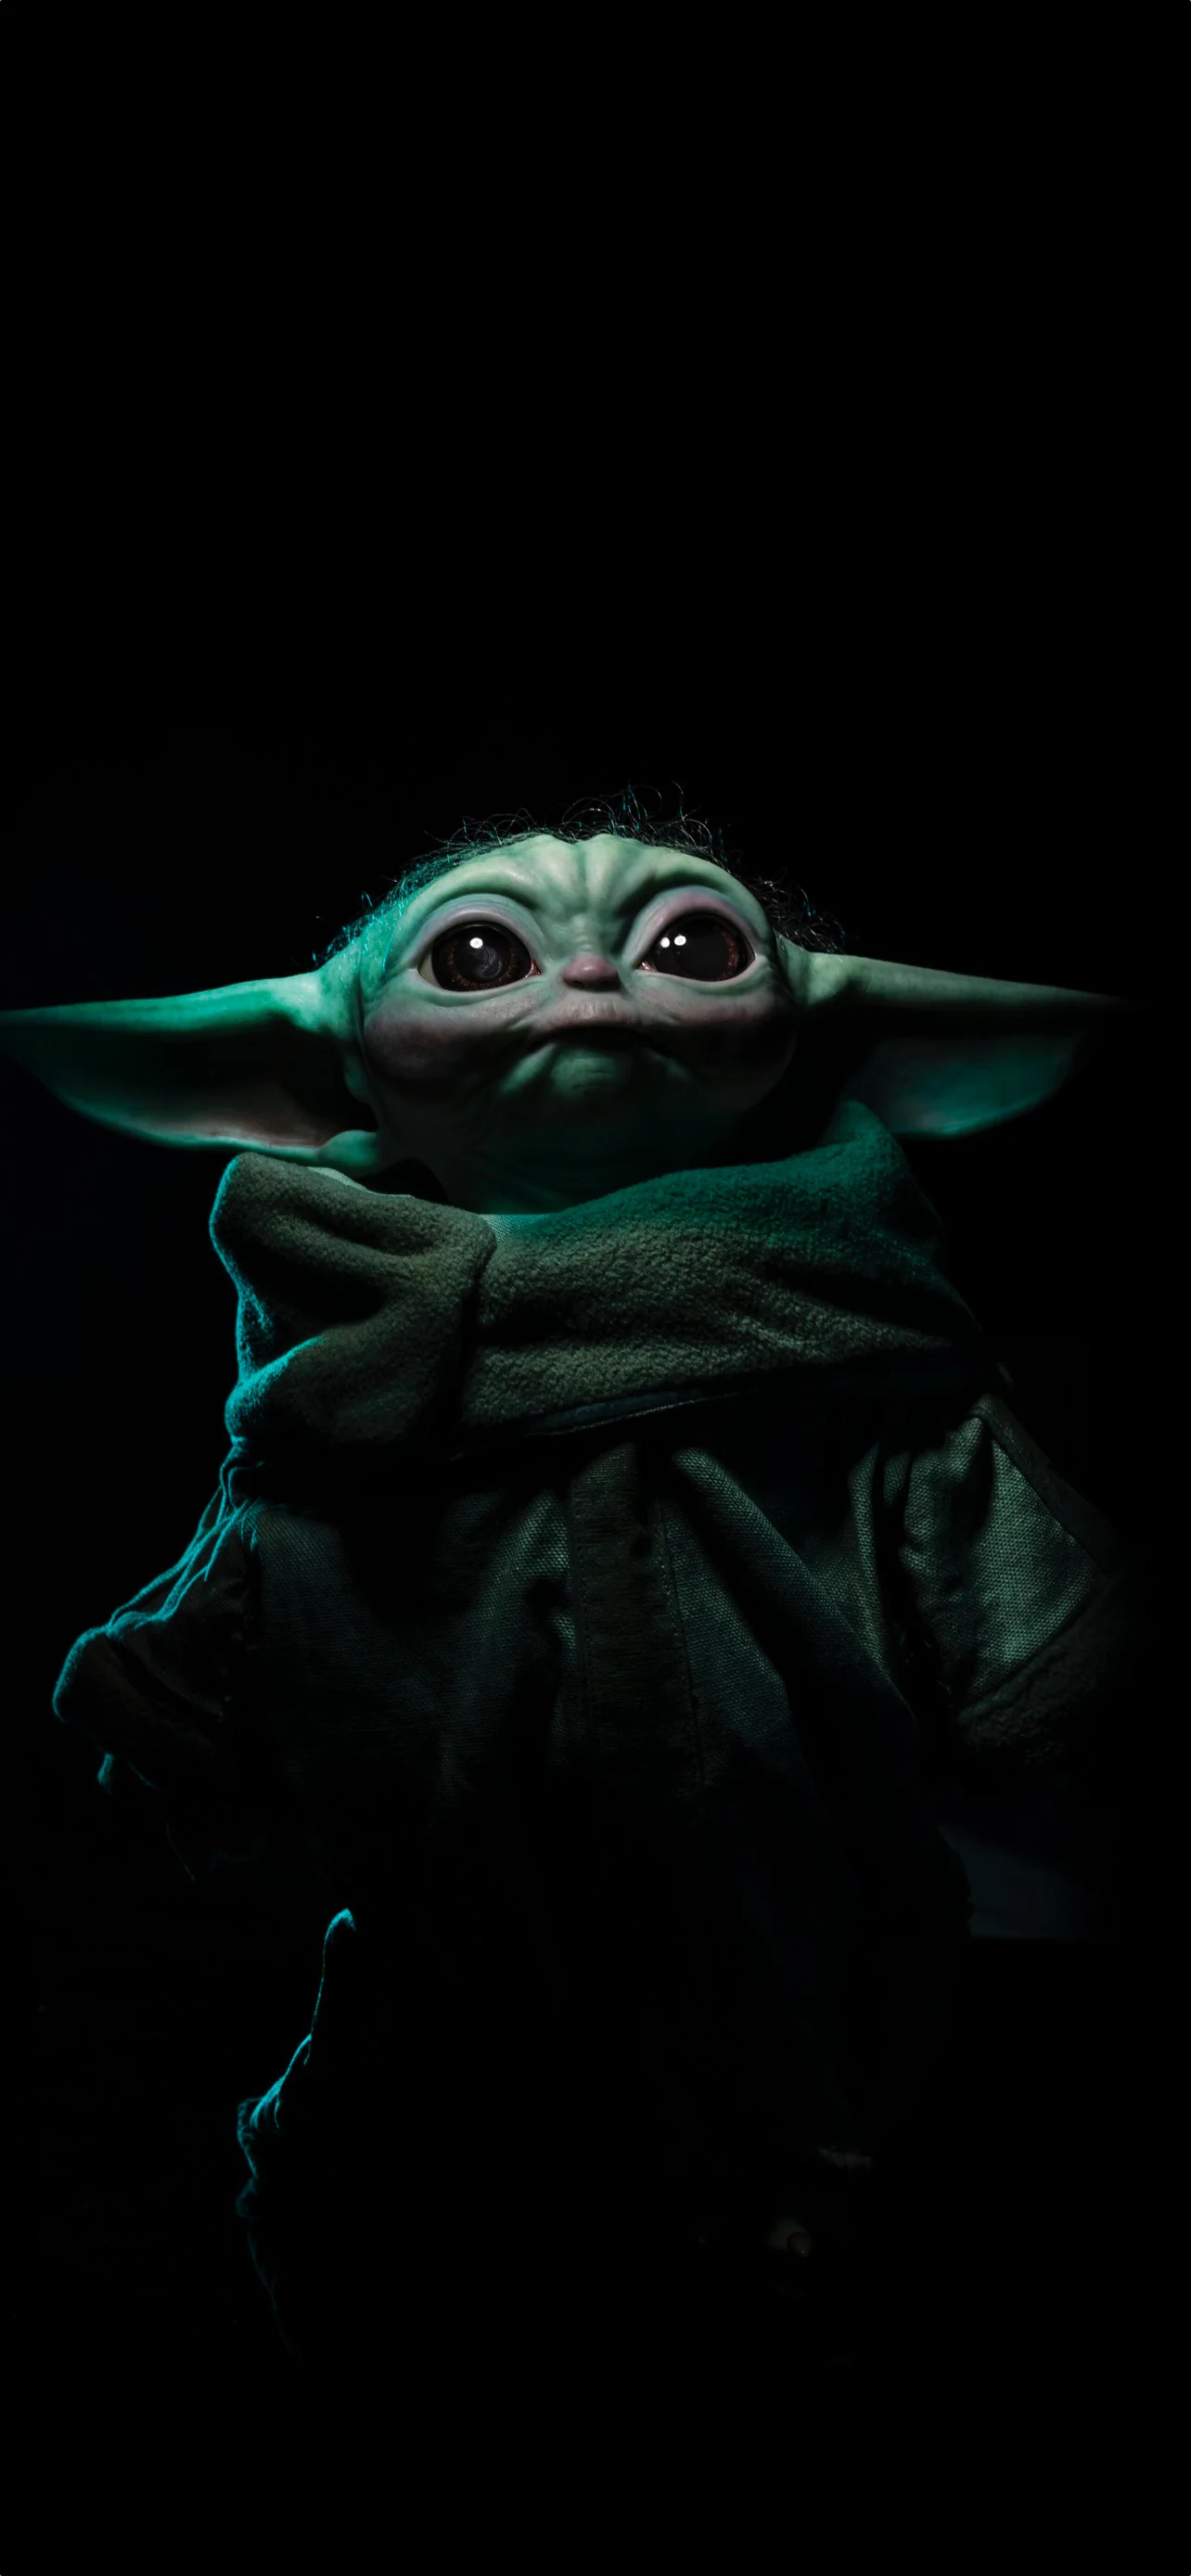 Baby Yoda mobile wallpapers, Mobile backgrounds, Star Wars character, Phone customization, 1290x2780 HD Handy